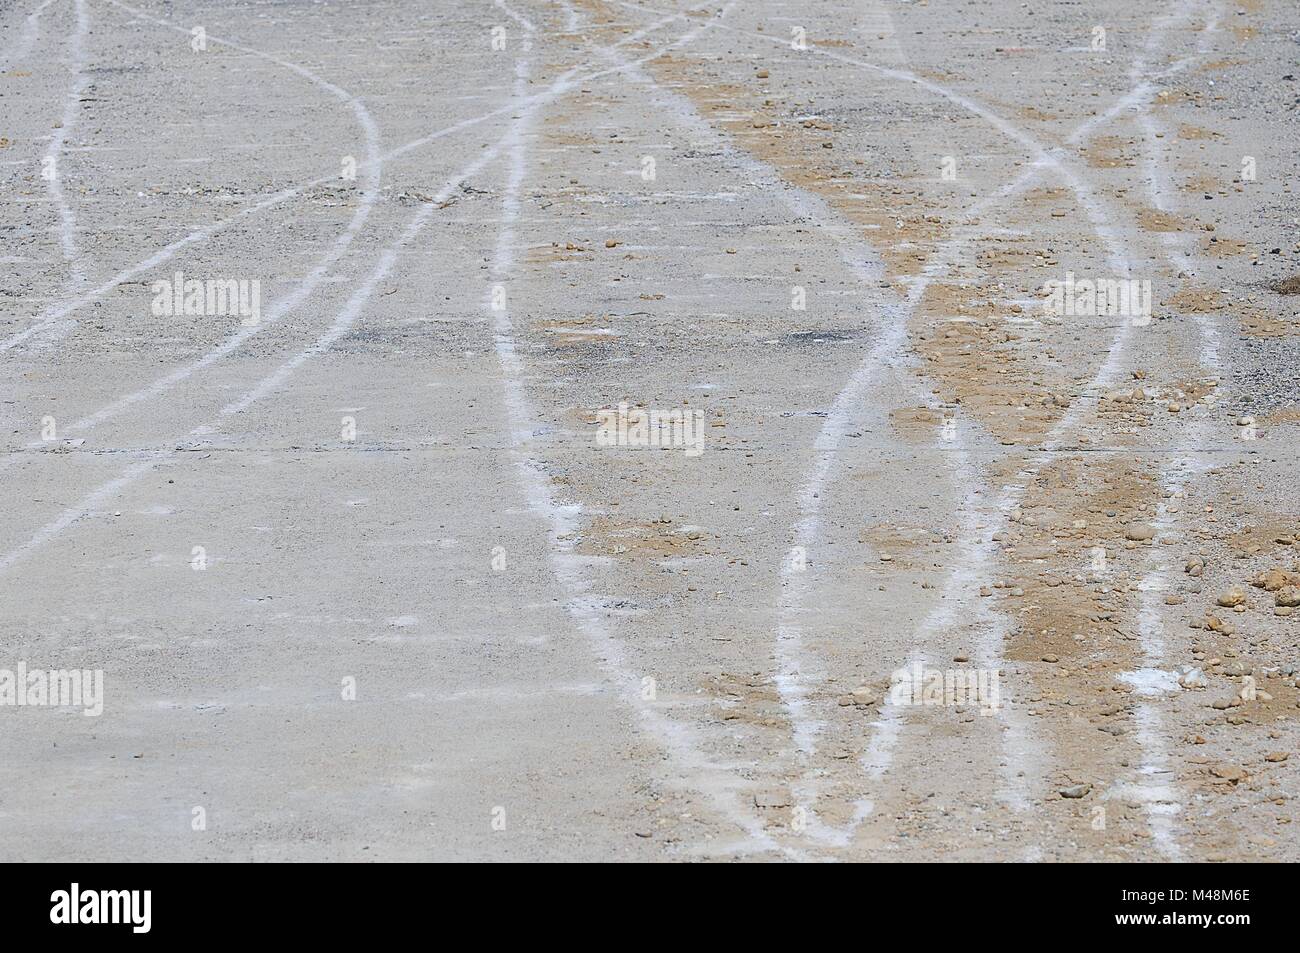 Traces of the construction site on the concrete pavement Stock Photo